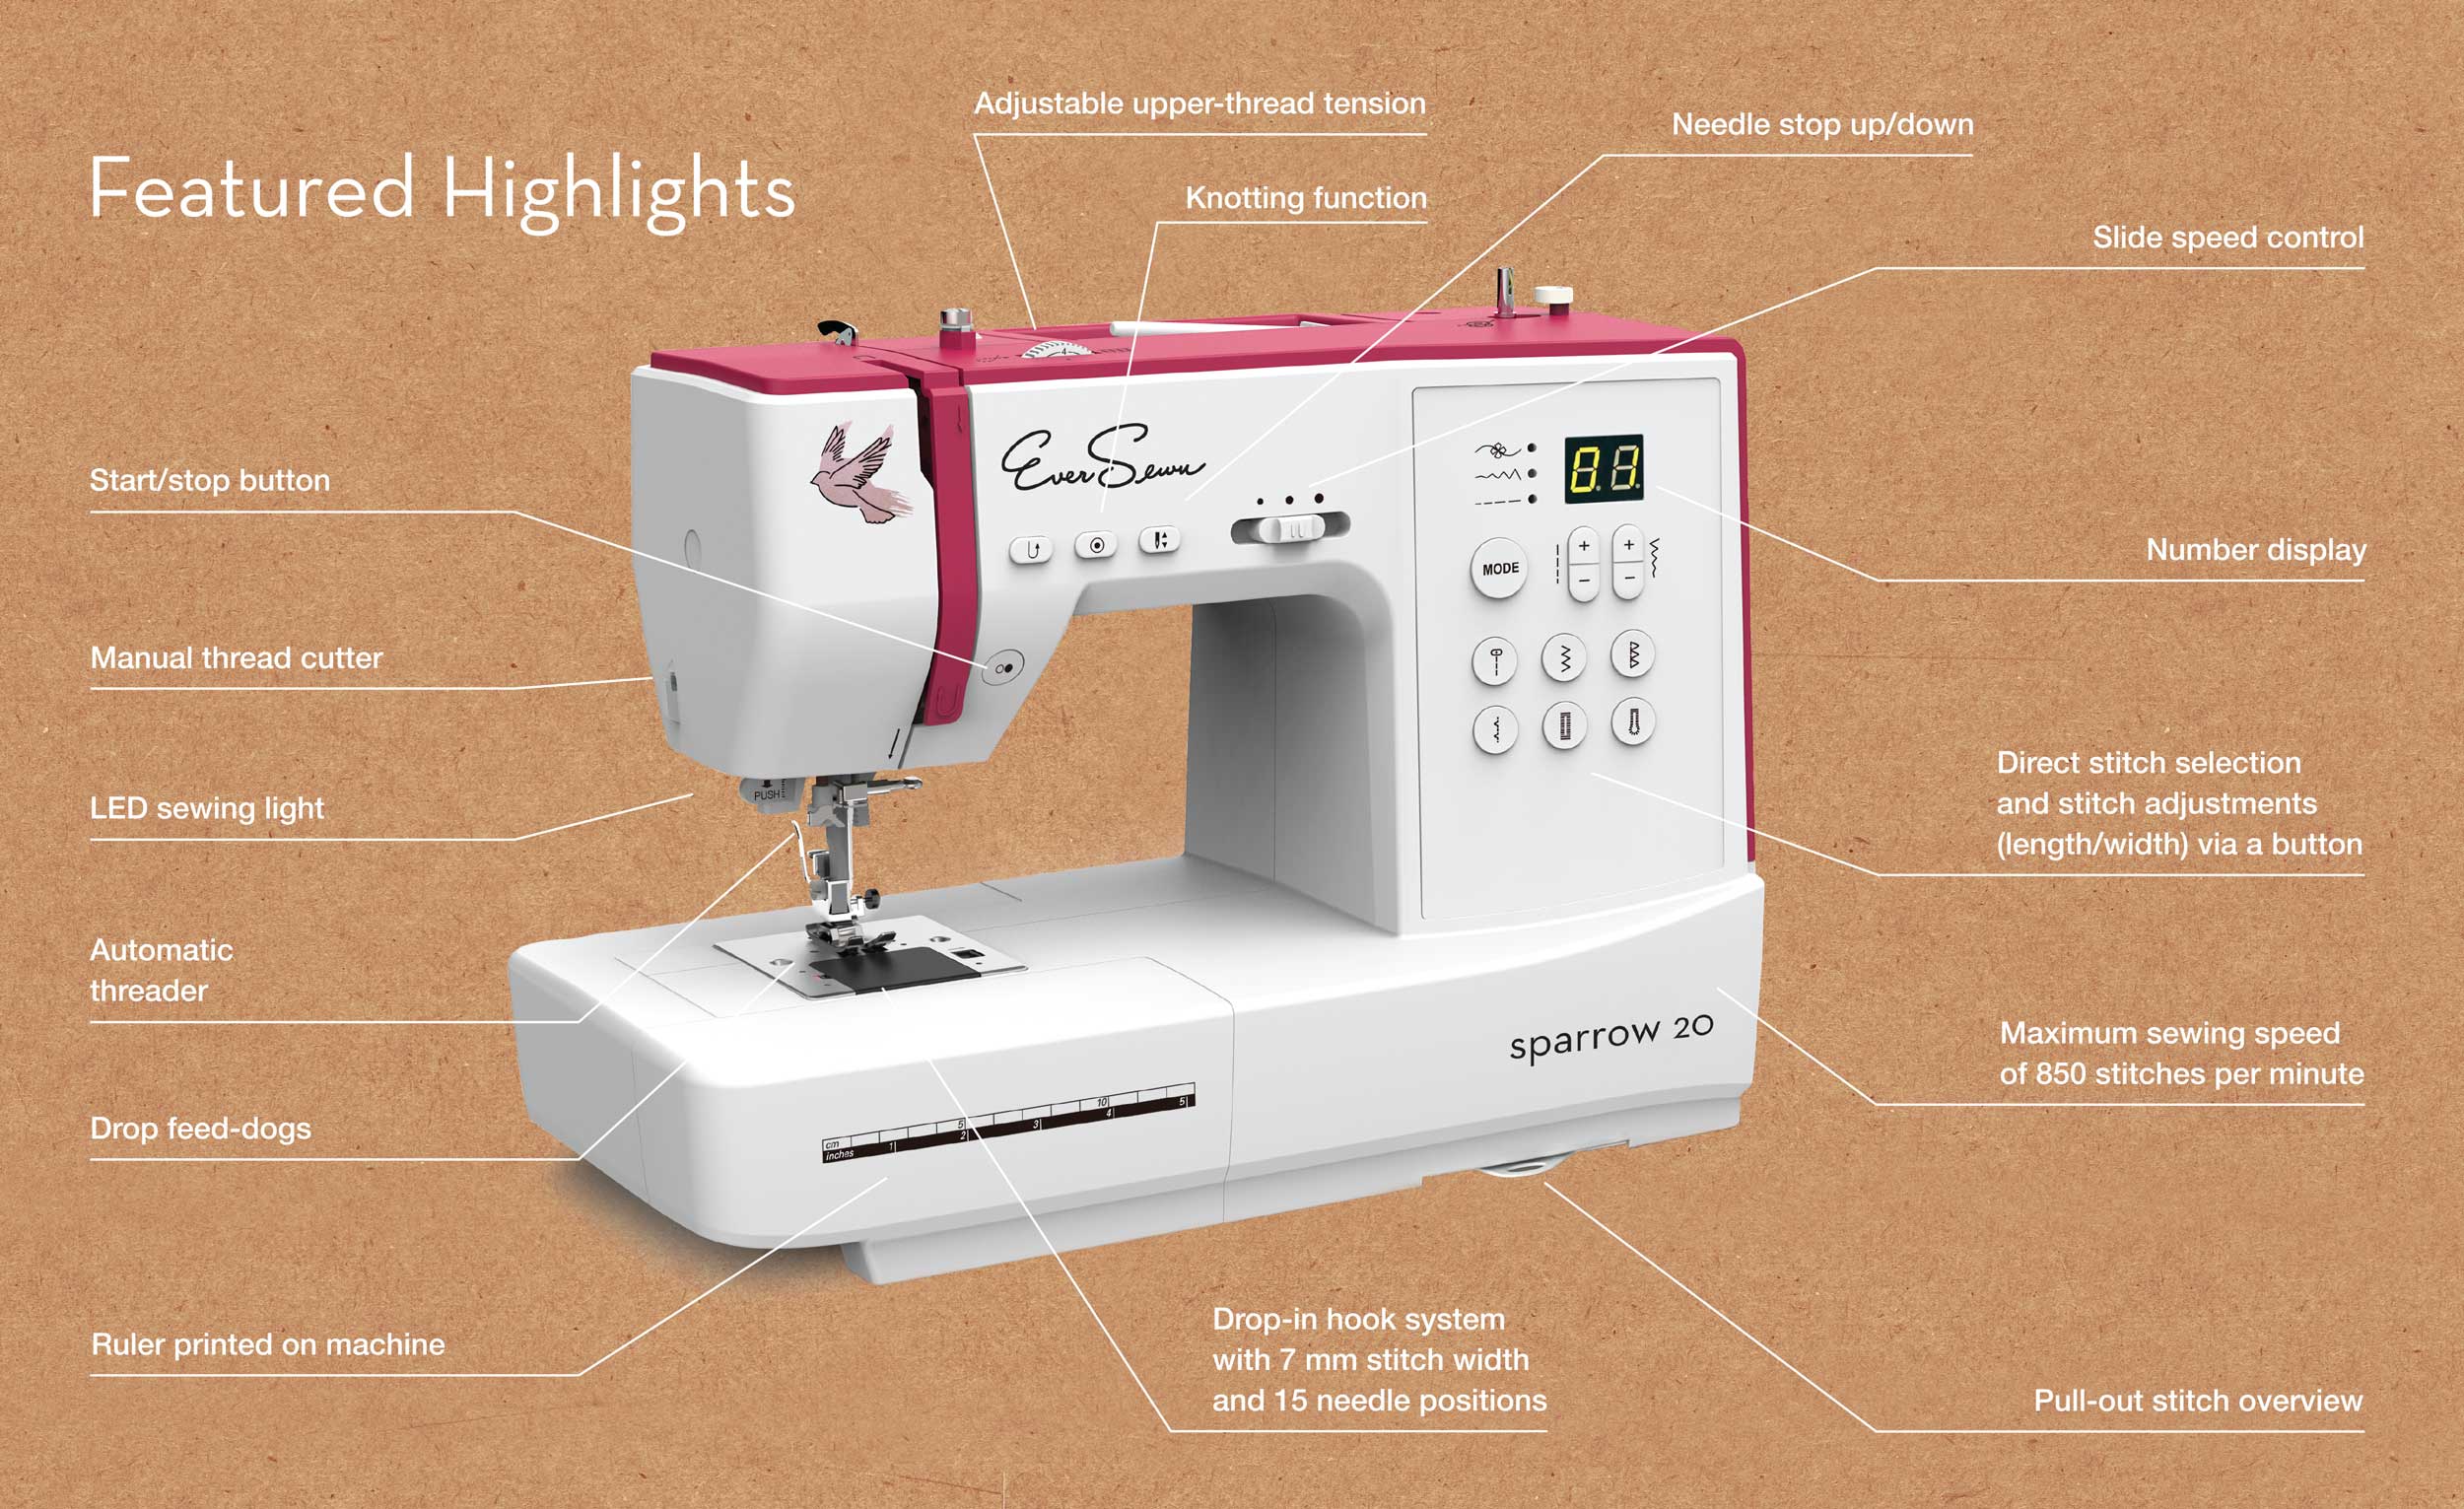 Sparrow 20 Sewing Machine — Eversewn